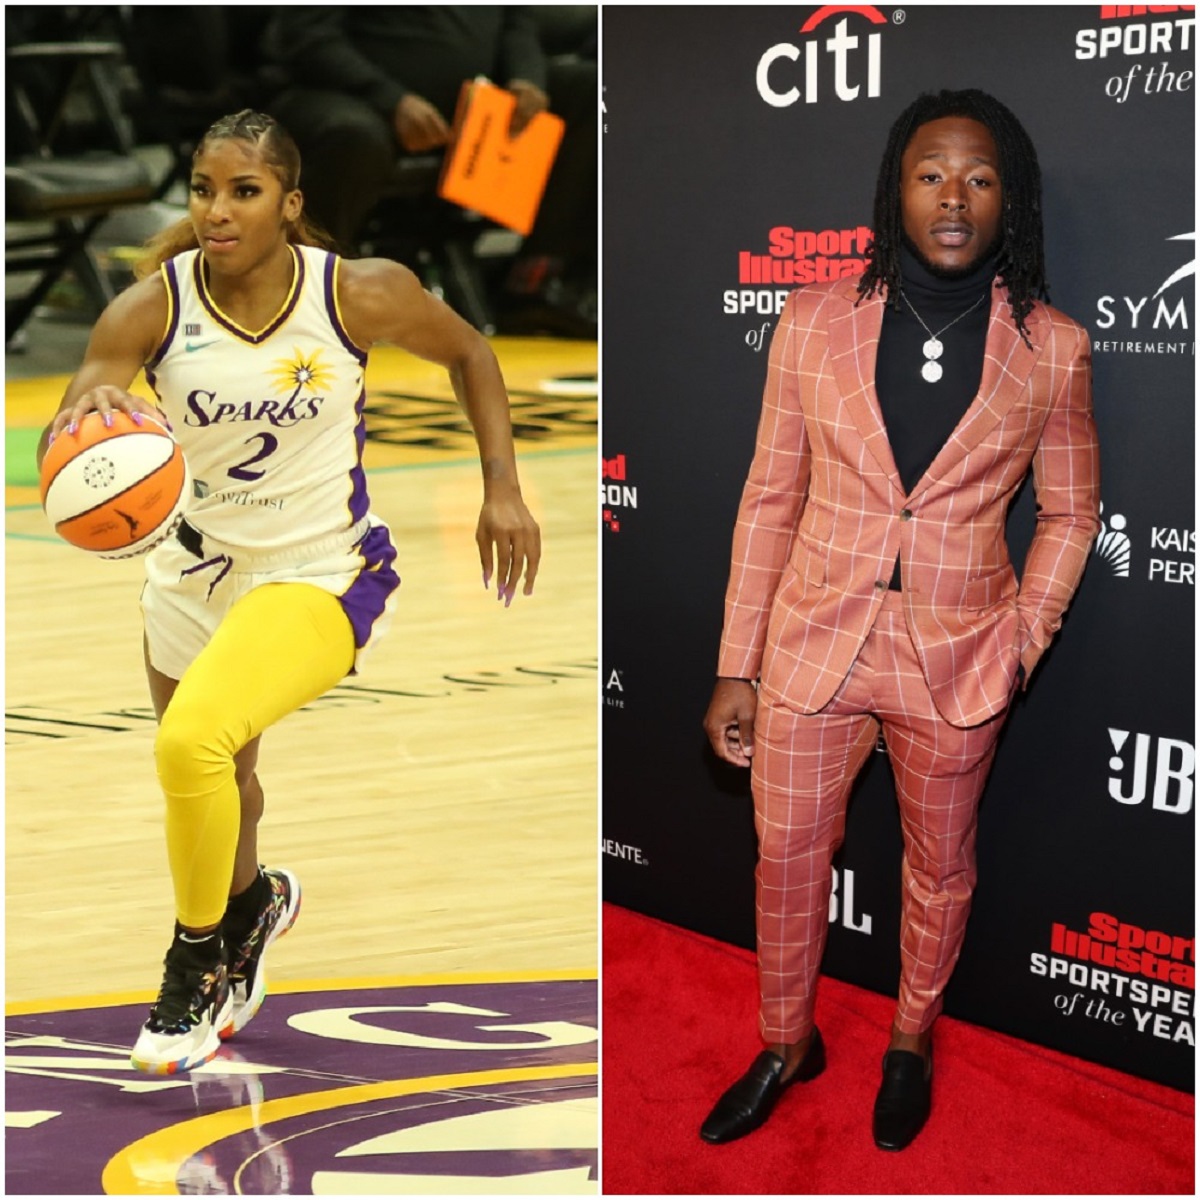 (L) Guard Te'a Cooper during the Indiana Fever versus the Los Angeles Sparks WNBA game, (R) Alvin Kamara attends Sports Illustrated Sportsperson of the Year Awards